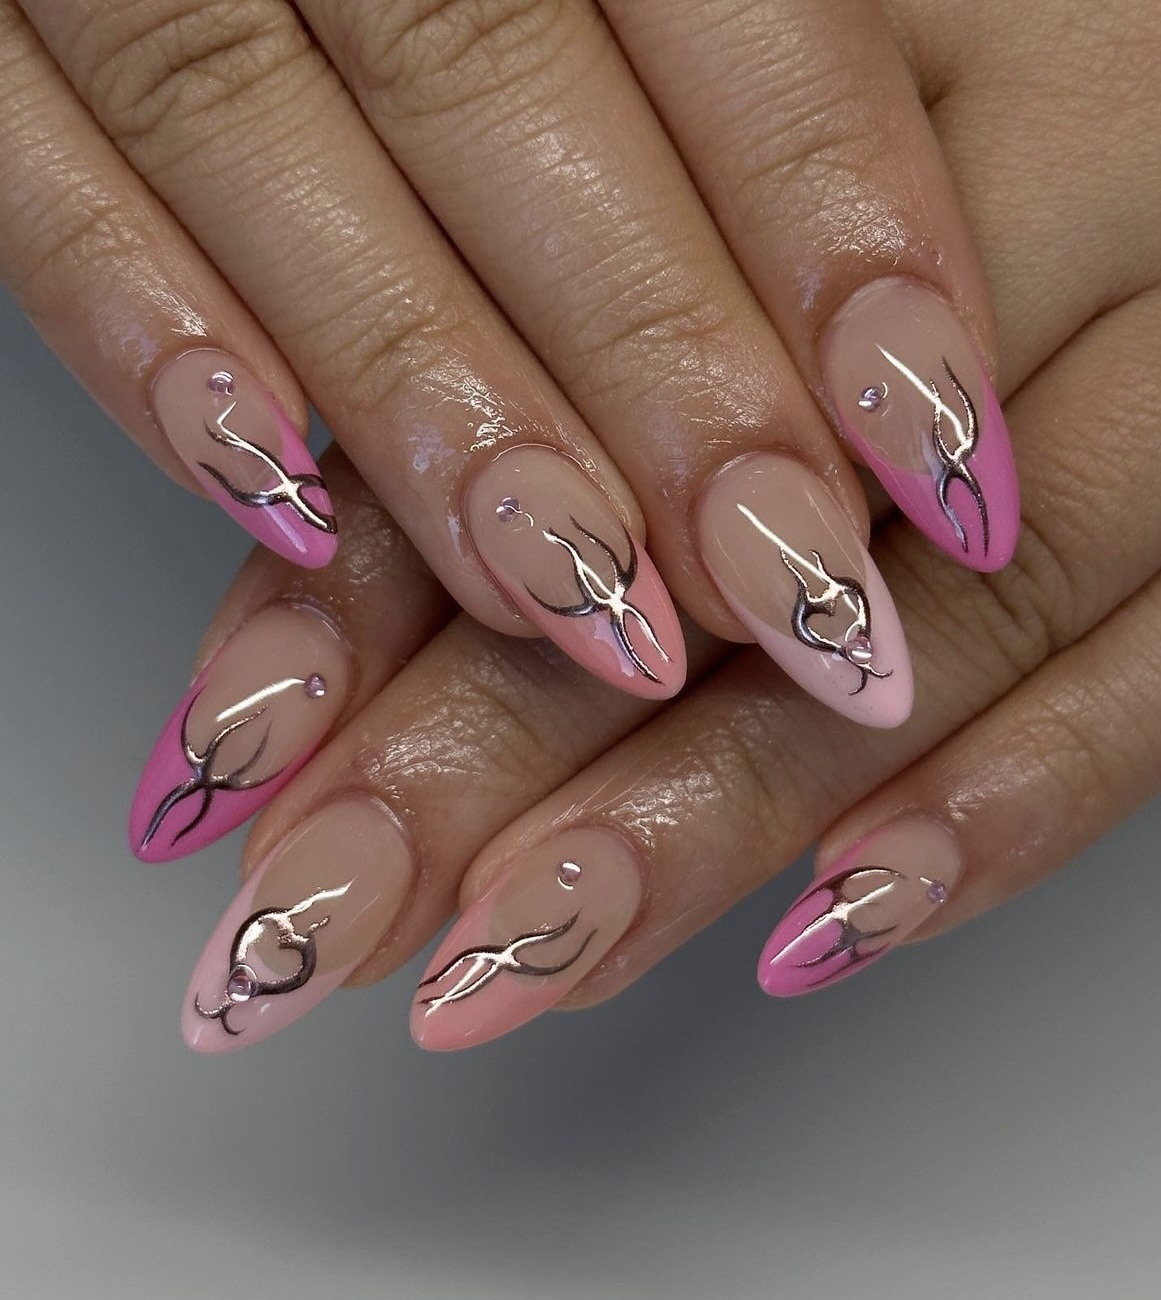 Looking to participate in the Barbie pink nails trend? Here's some inspiration! Picture: pink set of manicured nails.